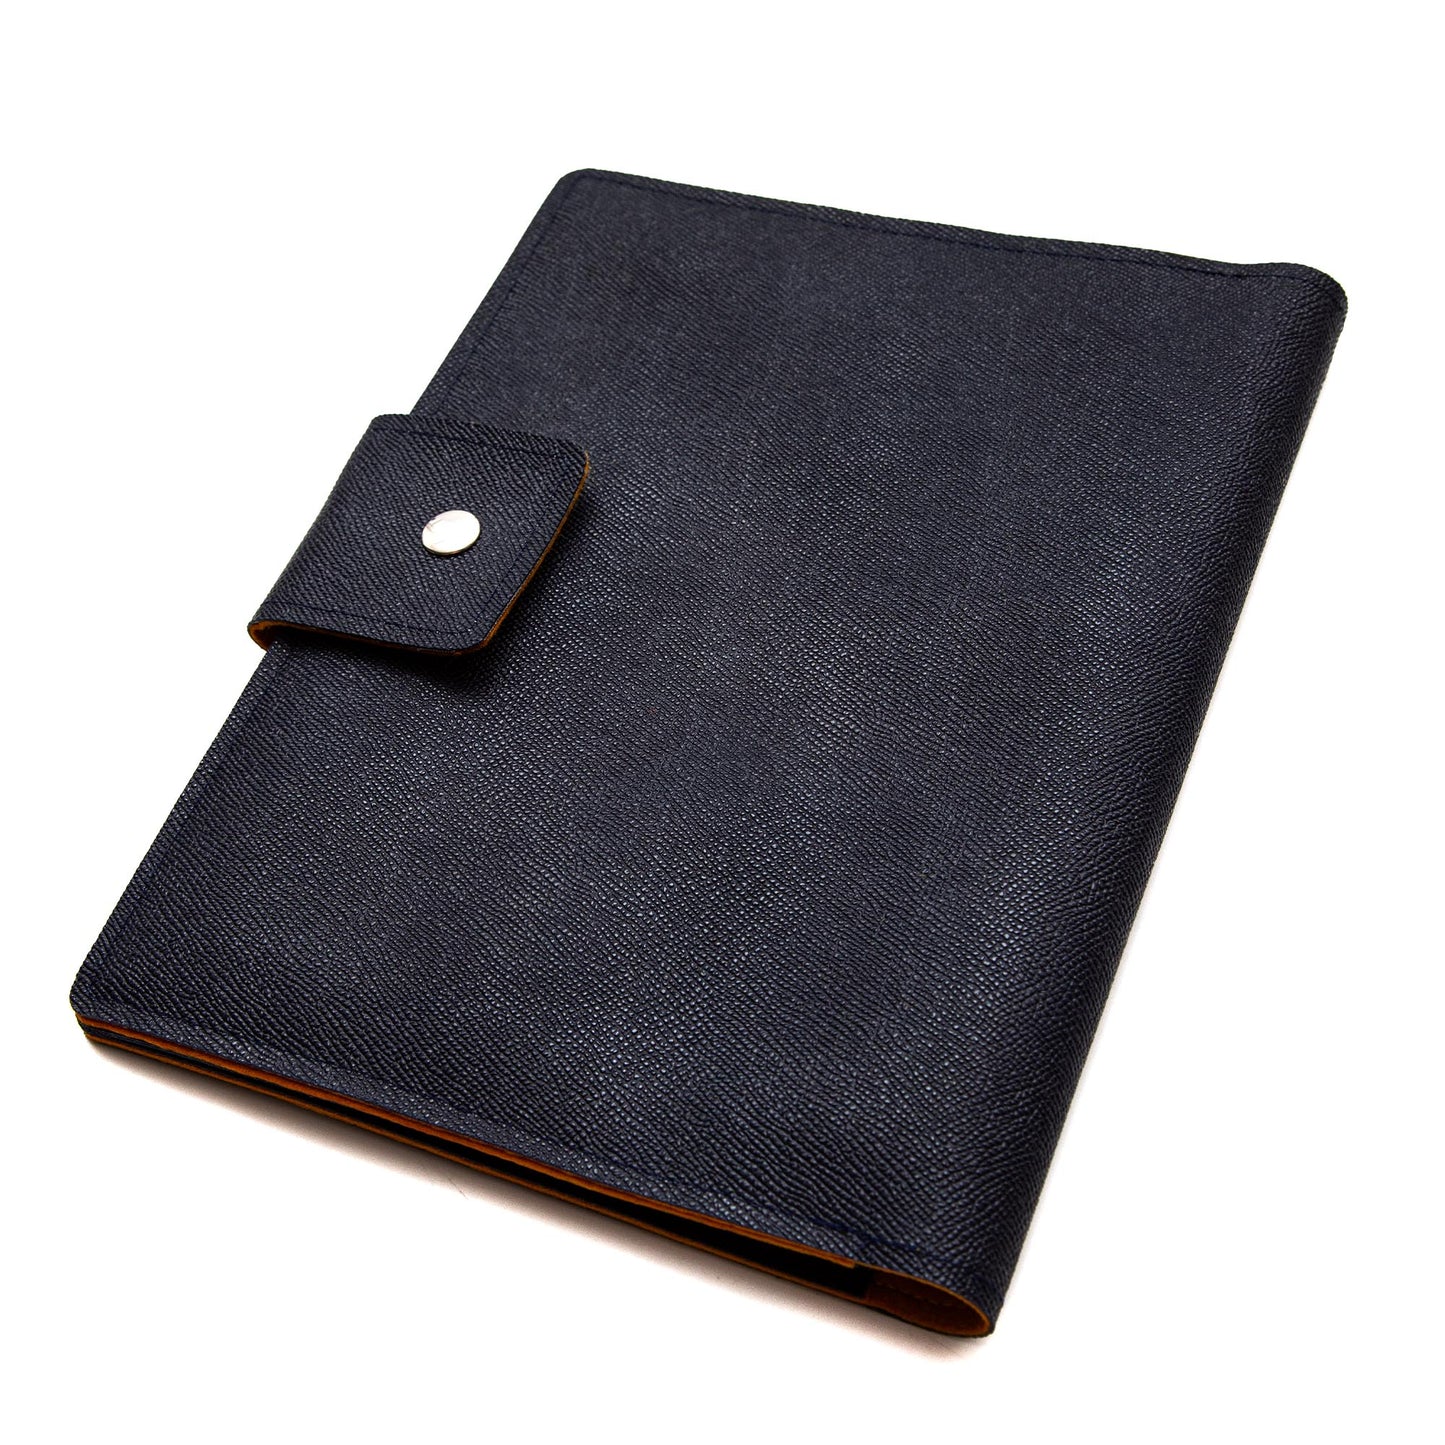 Handmade Folio Cover for iPad/Pro/Air - Navy & Mustard Faux Leather